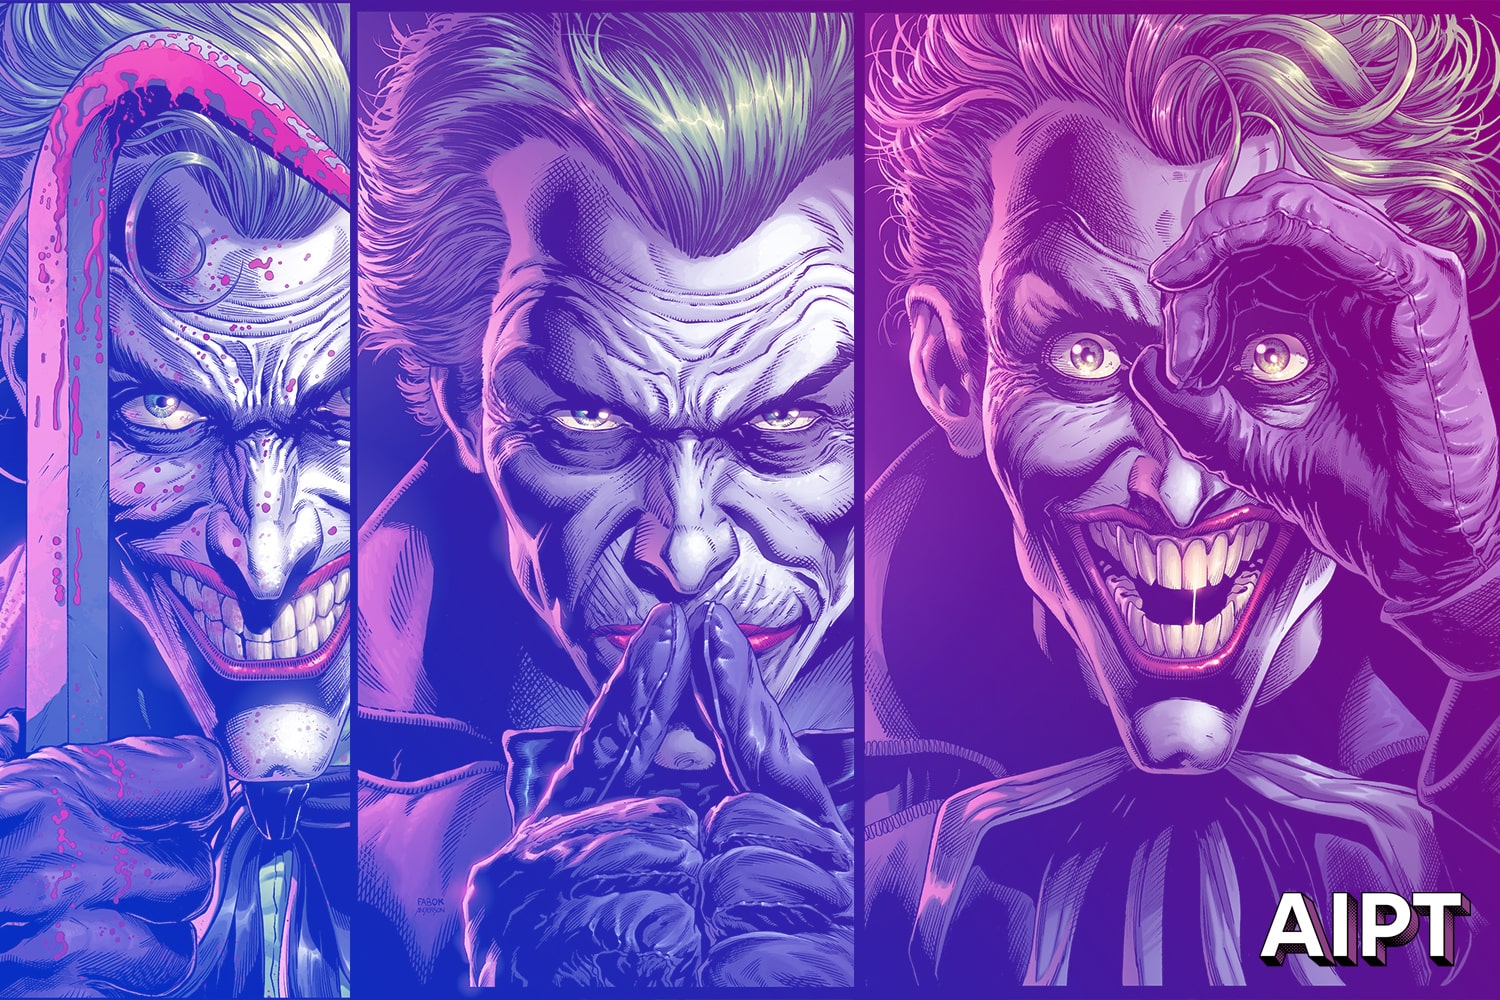 DC Comics reveals 'Batman: Three Jokers' for June release with interior art and covers